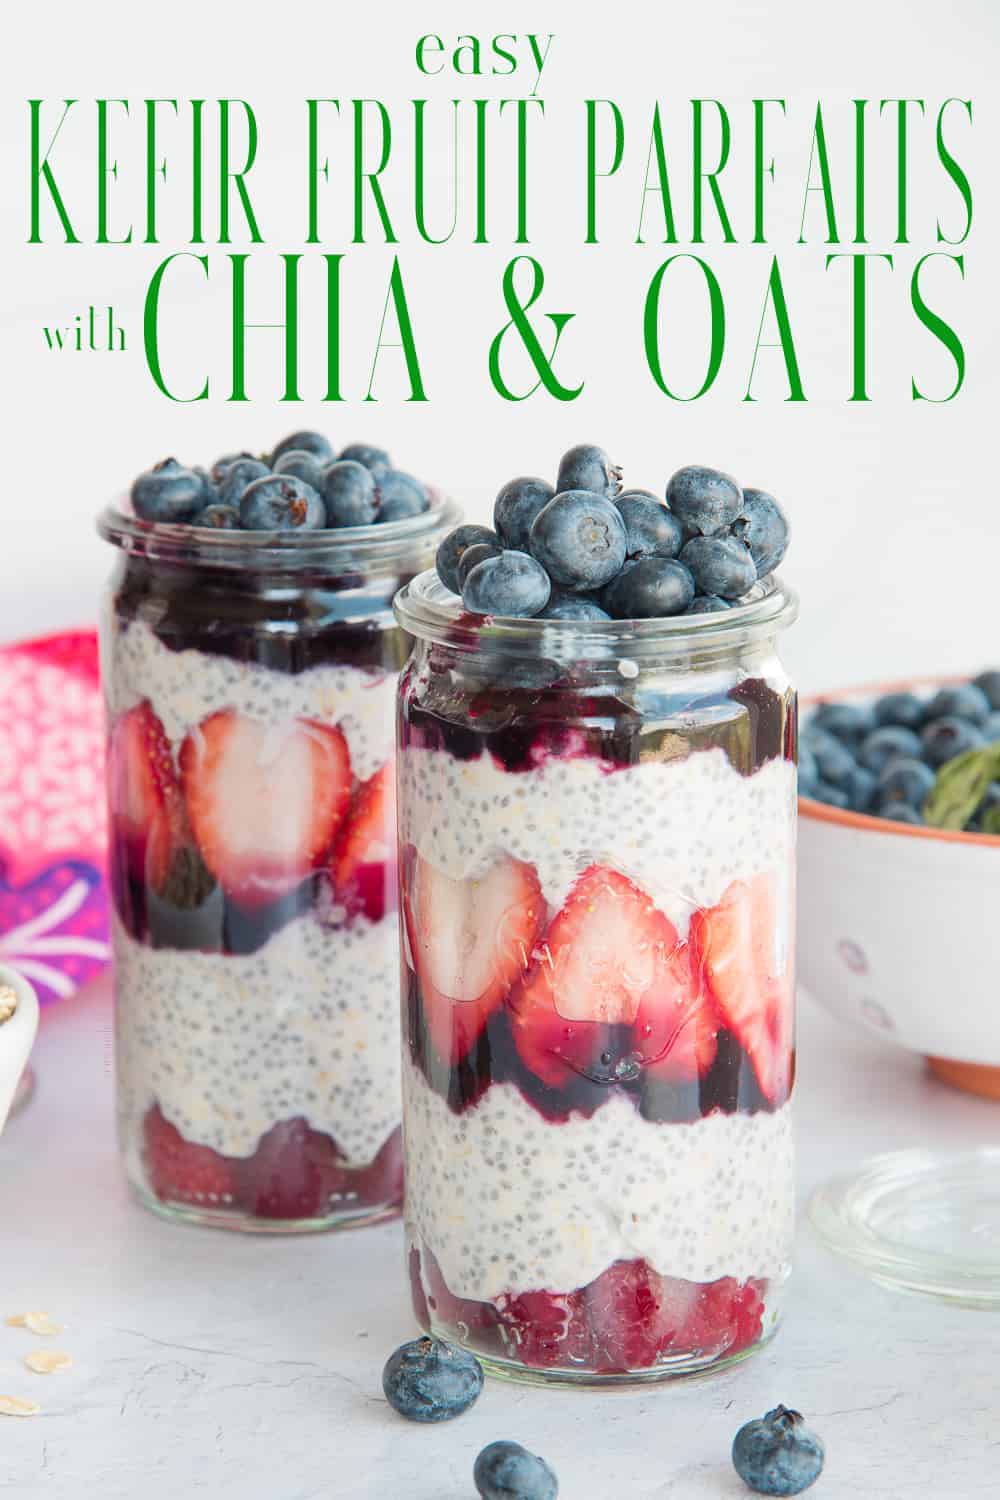 Chia Oats Fruit Parfaits are a make-ahead breakfast recipe that is easily customizable. It's a filling, kefir-based breakfast that's great for meal planning. #chiaseeds #overnightoats #fruit #fruitparfaits #easybreakfast #breakfast #makeahead #mealplanning #berries #kefir #yogurt #chiapudding via @ediblesense